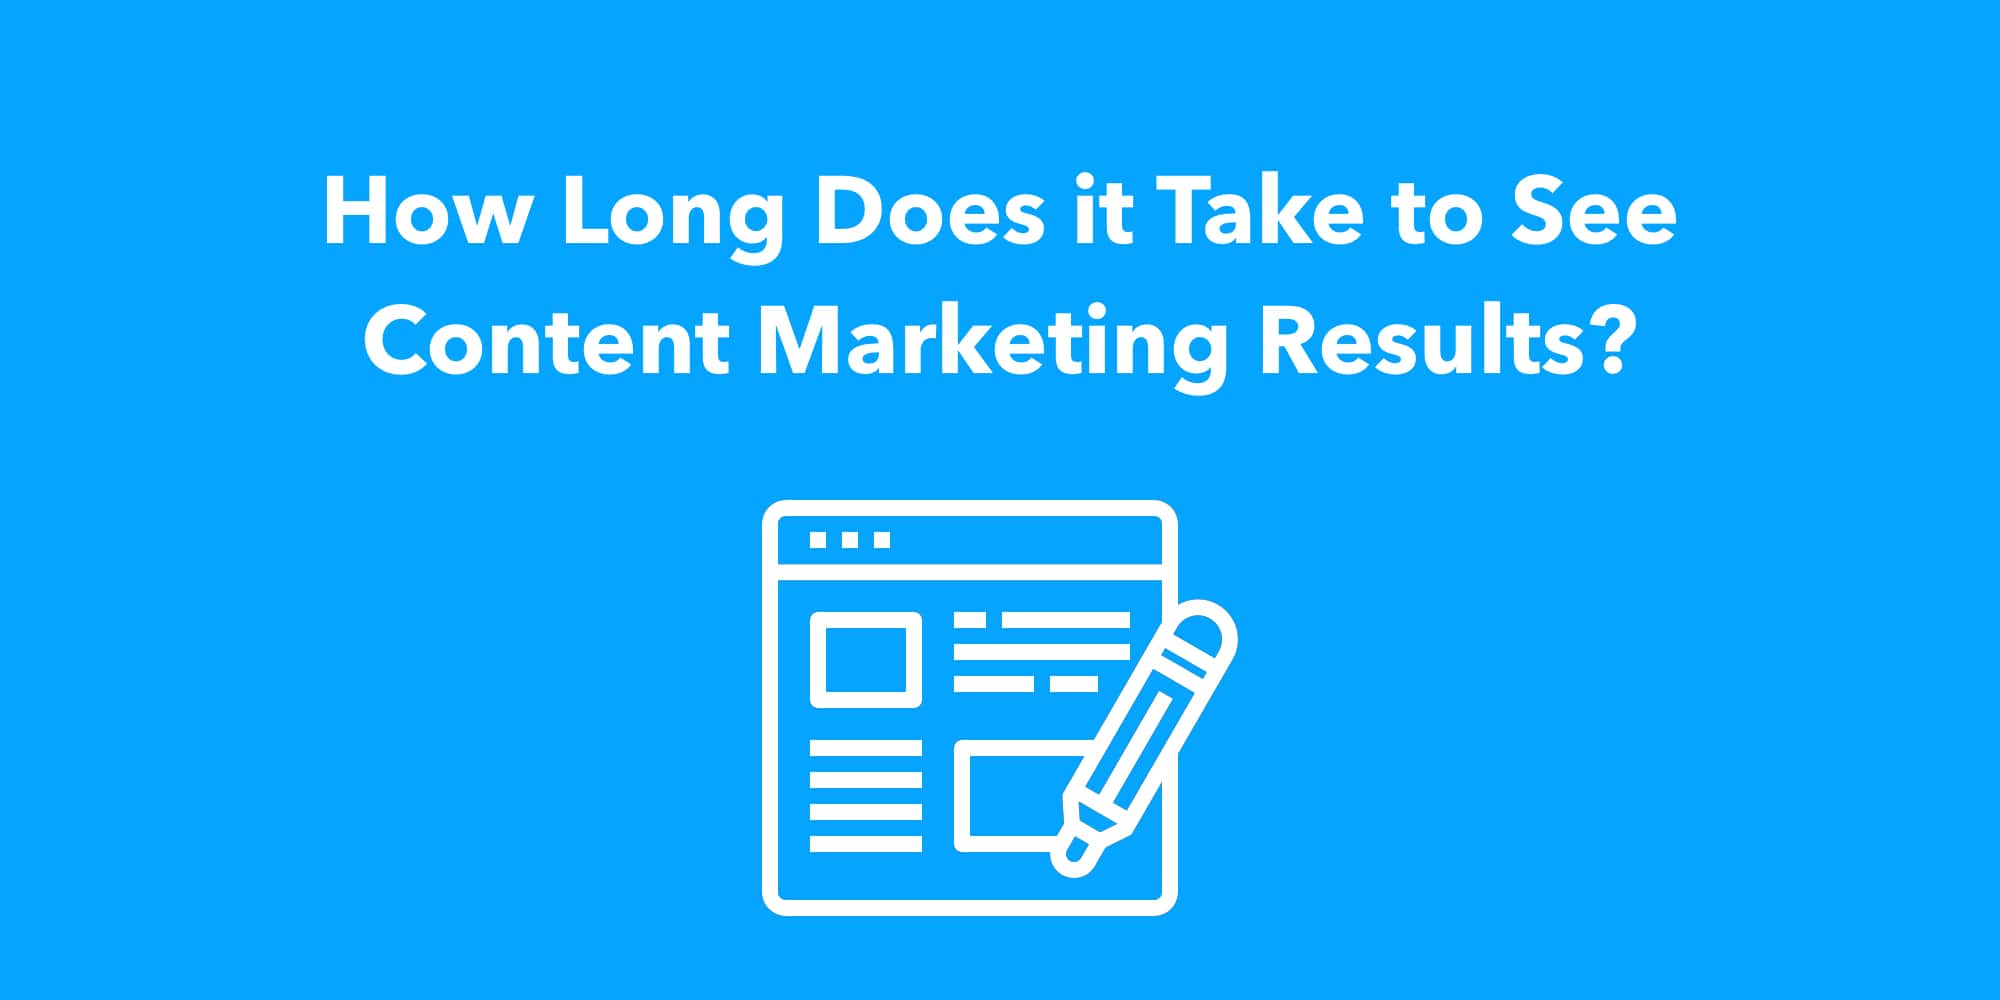 How Long Does it Take to See Content Marketing Results?